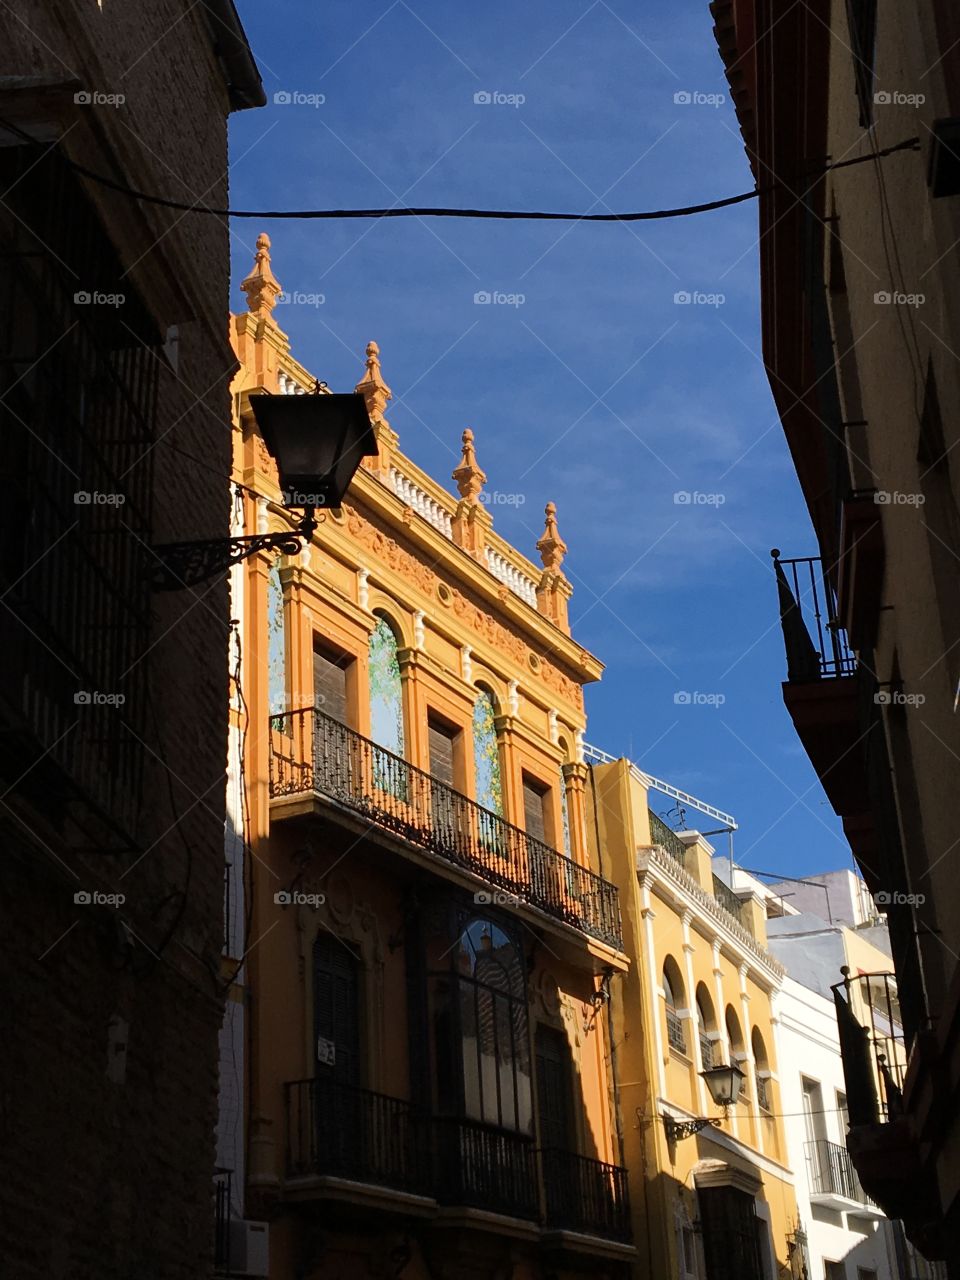 Street view in Andalucía, Spain